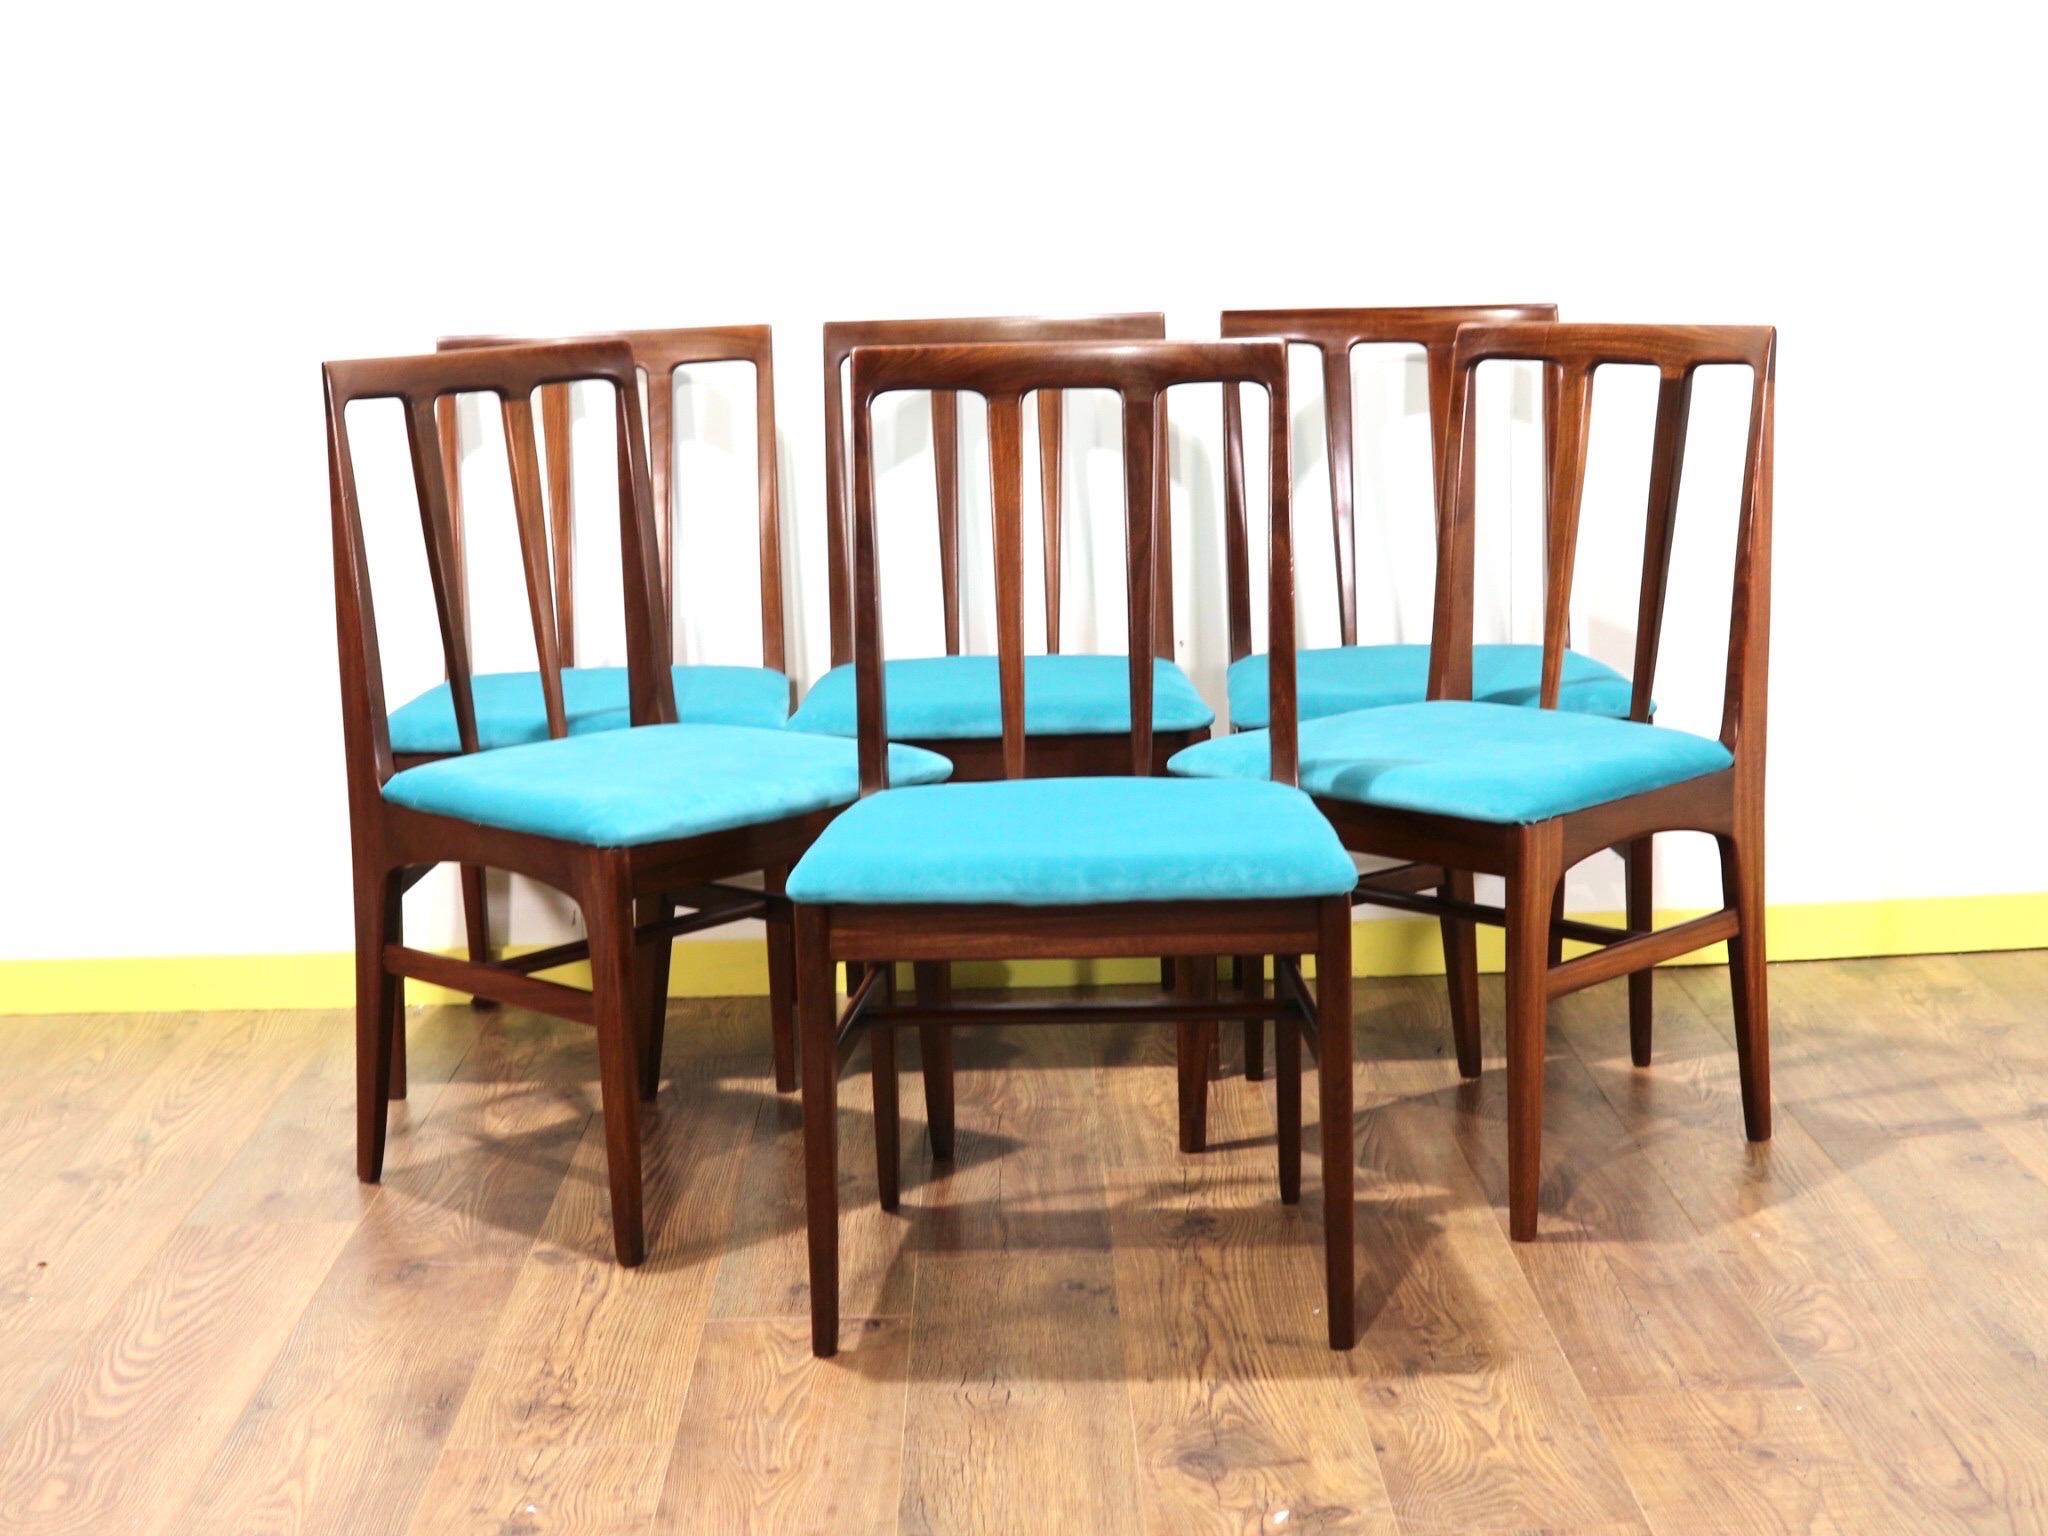 British Mid-Century Modern Aromosia Danish Style Dining Chairs by Younger x 6